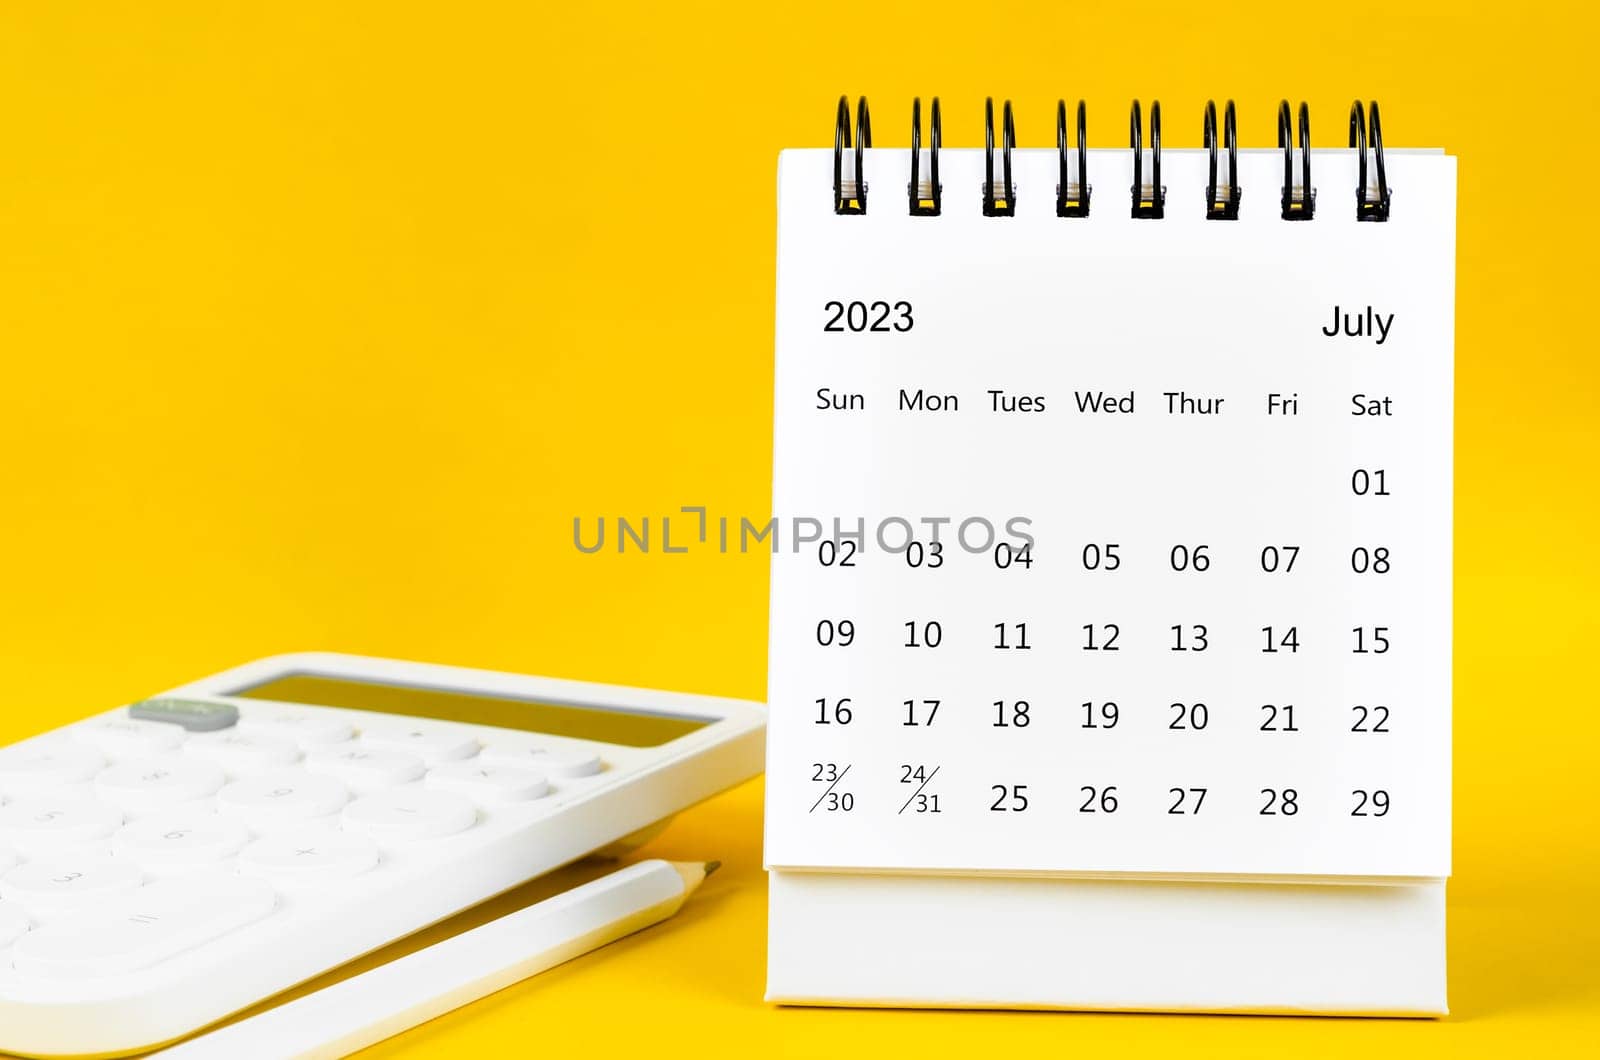 The July 2023 Monthly desk calendar for 2023 year and calculator with pen on yellow background. by Gamjai